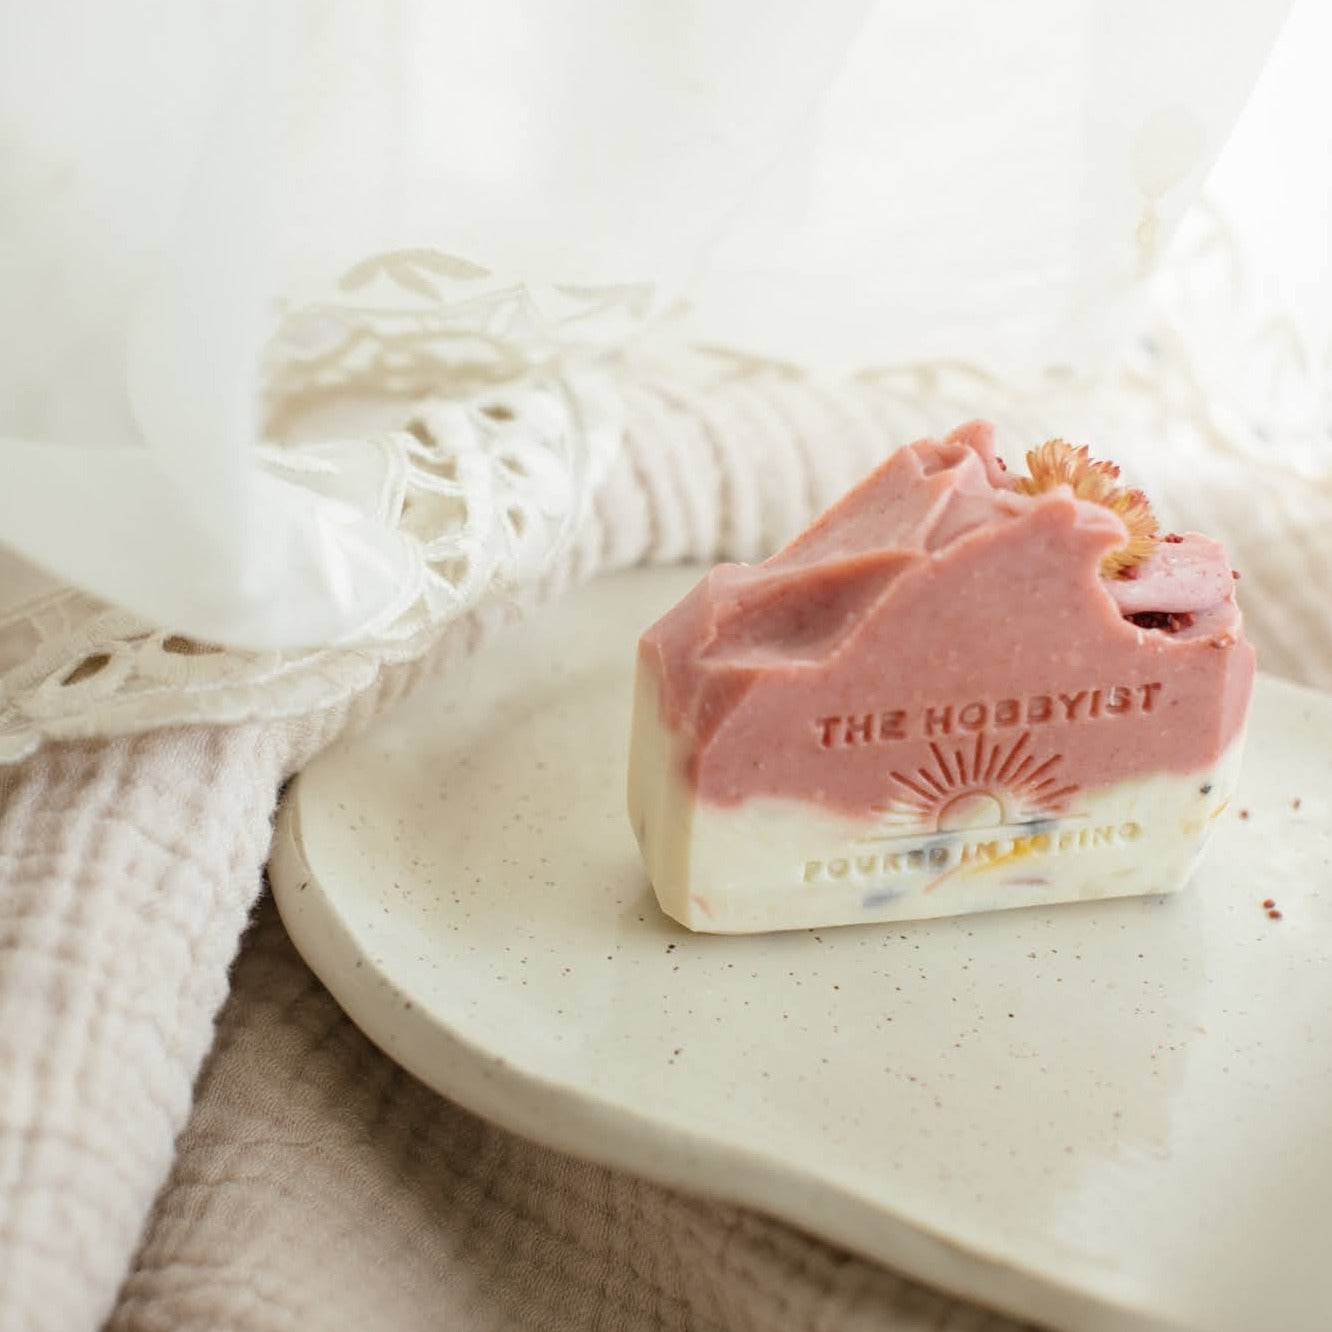 Product photography of Stubbs Island soap for our Botanical Soap Collection.